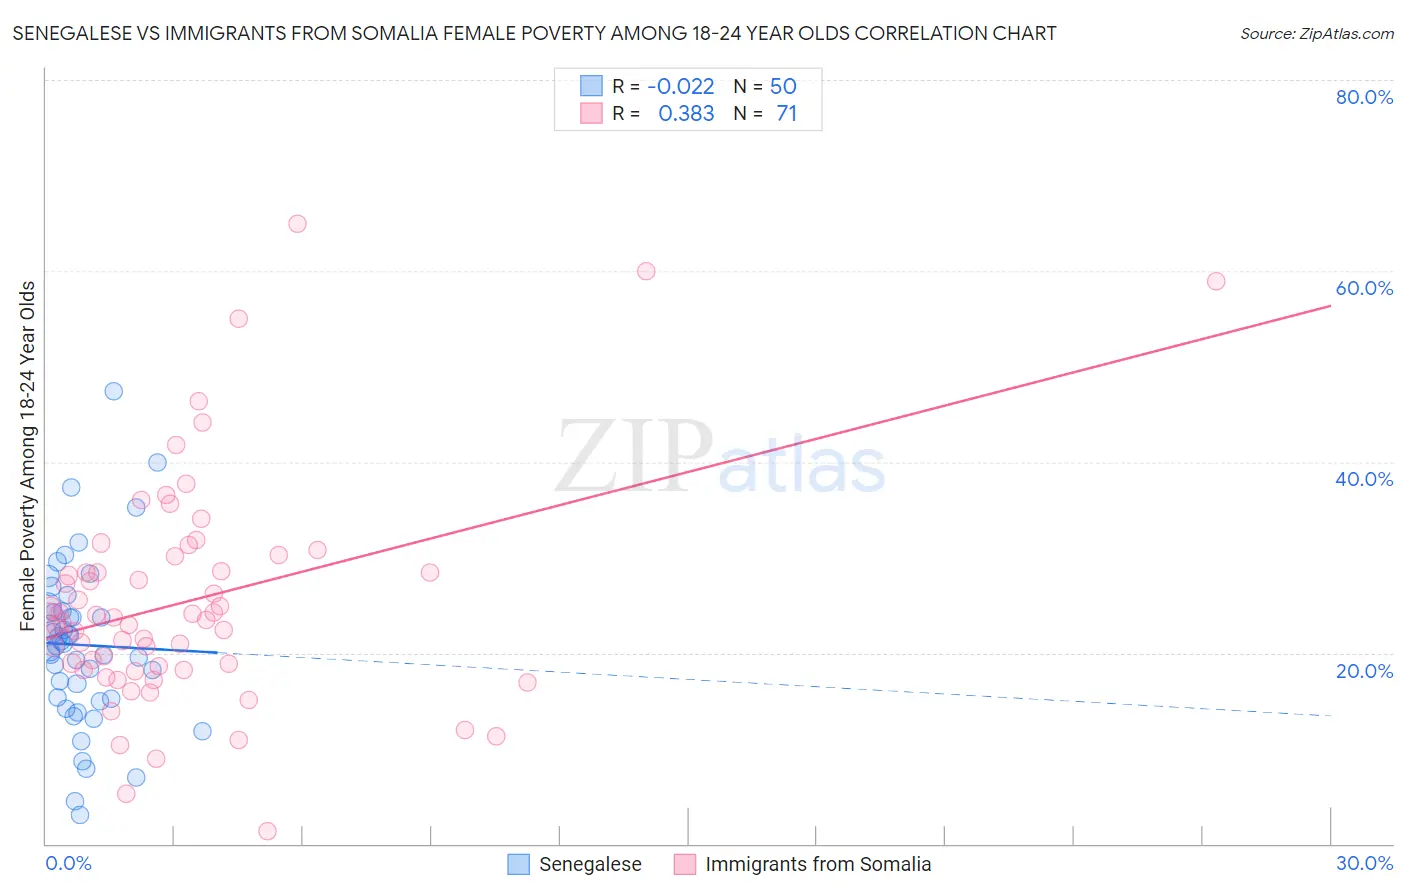 Senegalese vs Immigrants from Somalia Female Poverty Among 18-24 Year Olds